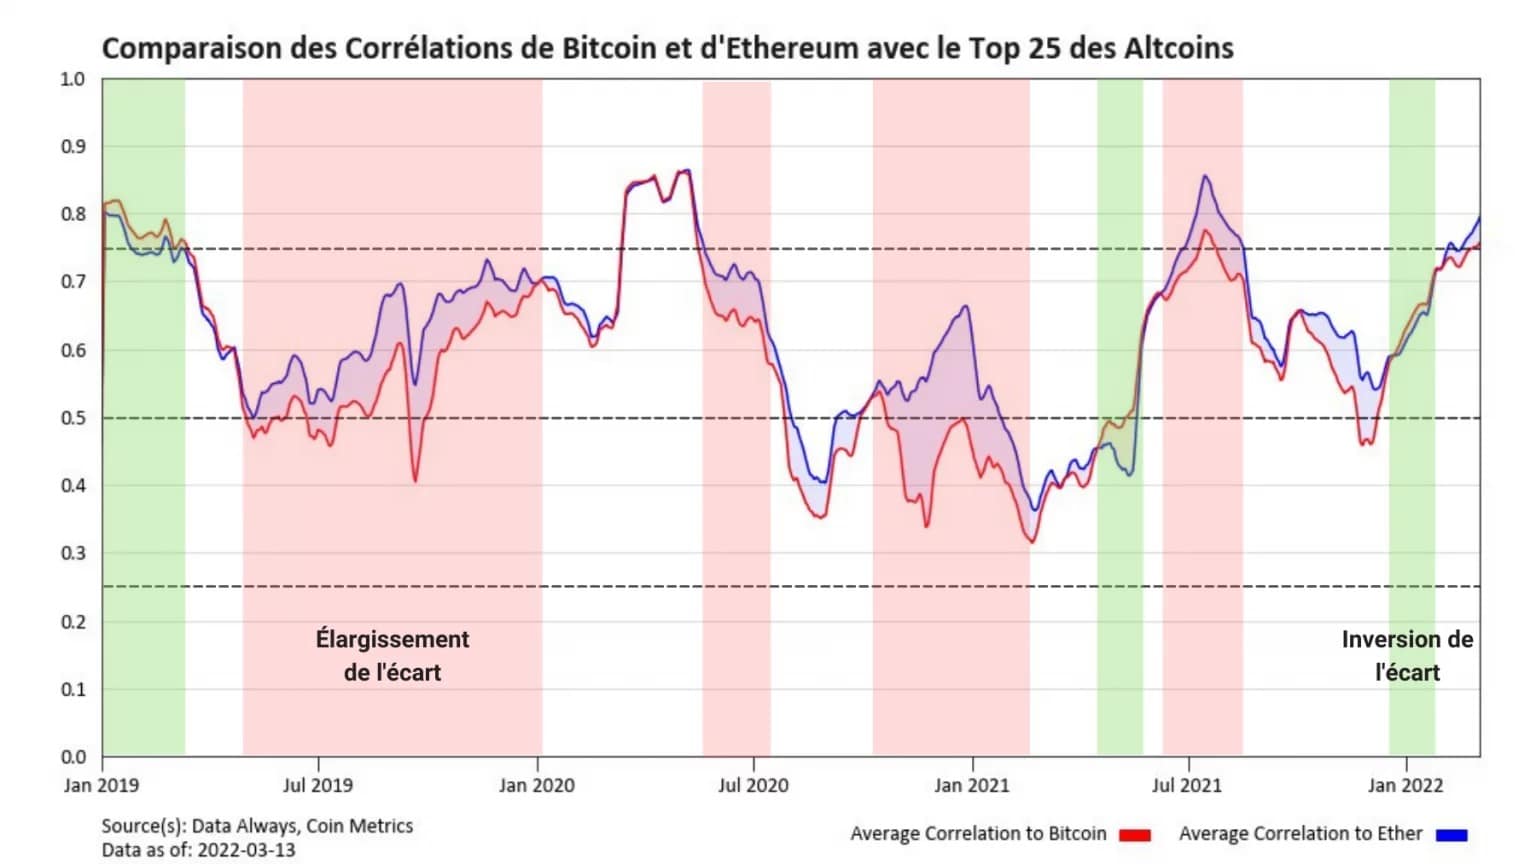 Figure 5: Comparison of BTC and ETH correlations with the Top 25 altcoins